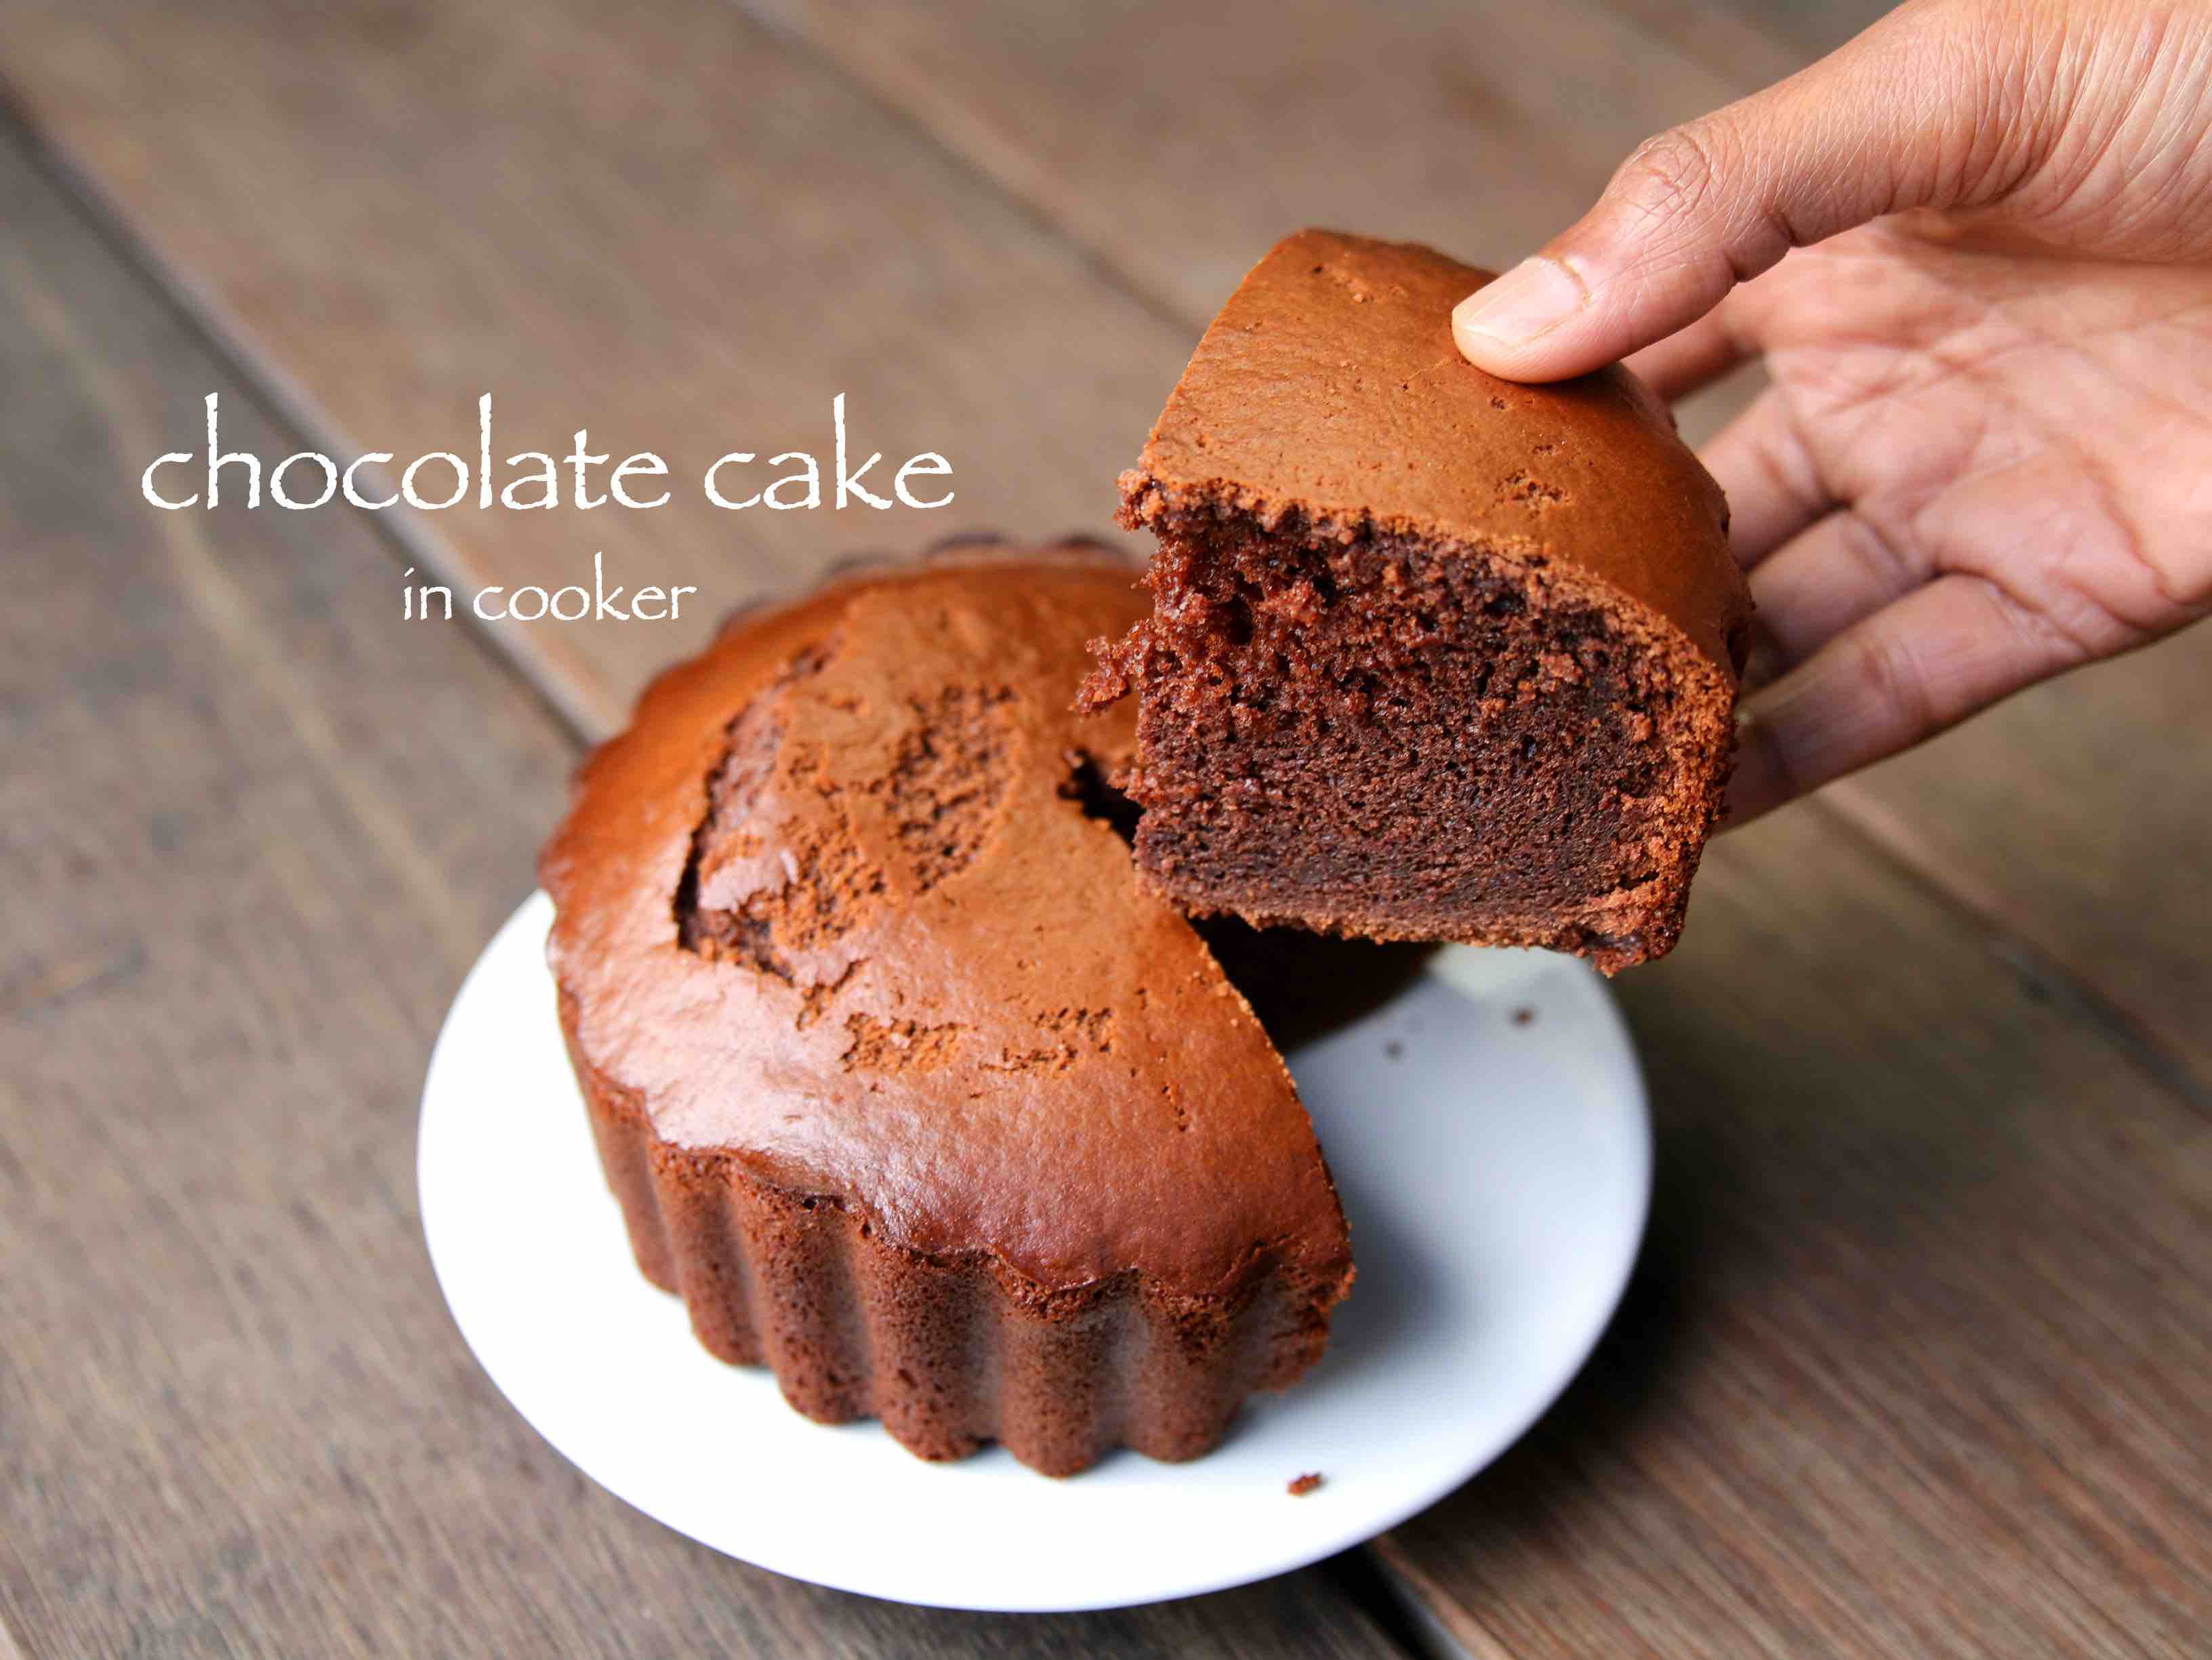 cooker cake recipe | pressure cooker cake | chocolate cake without oven